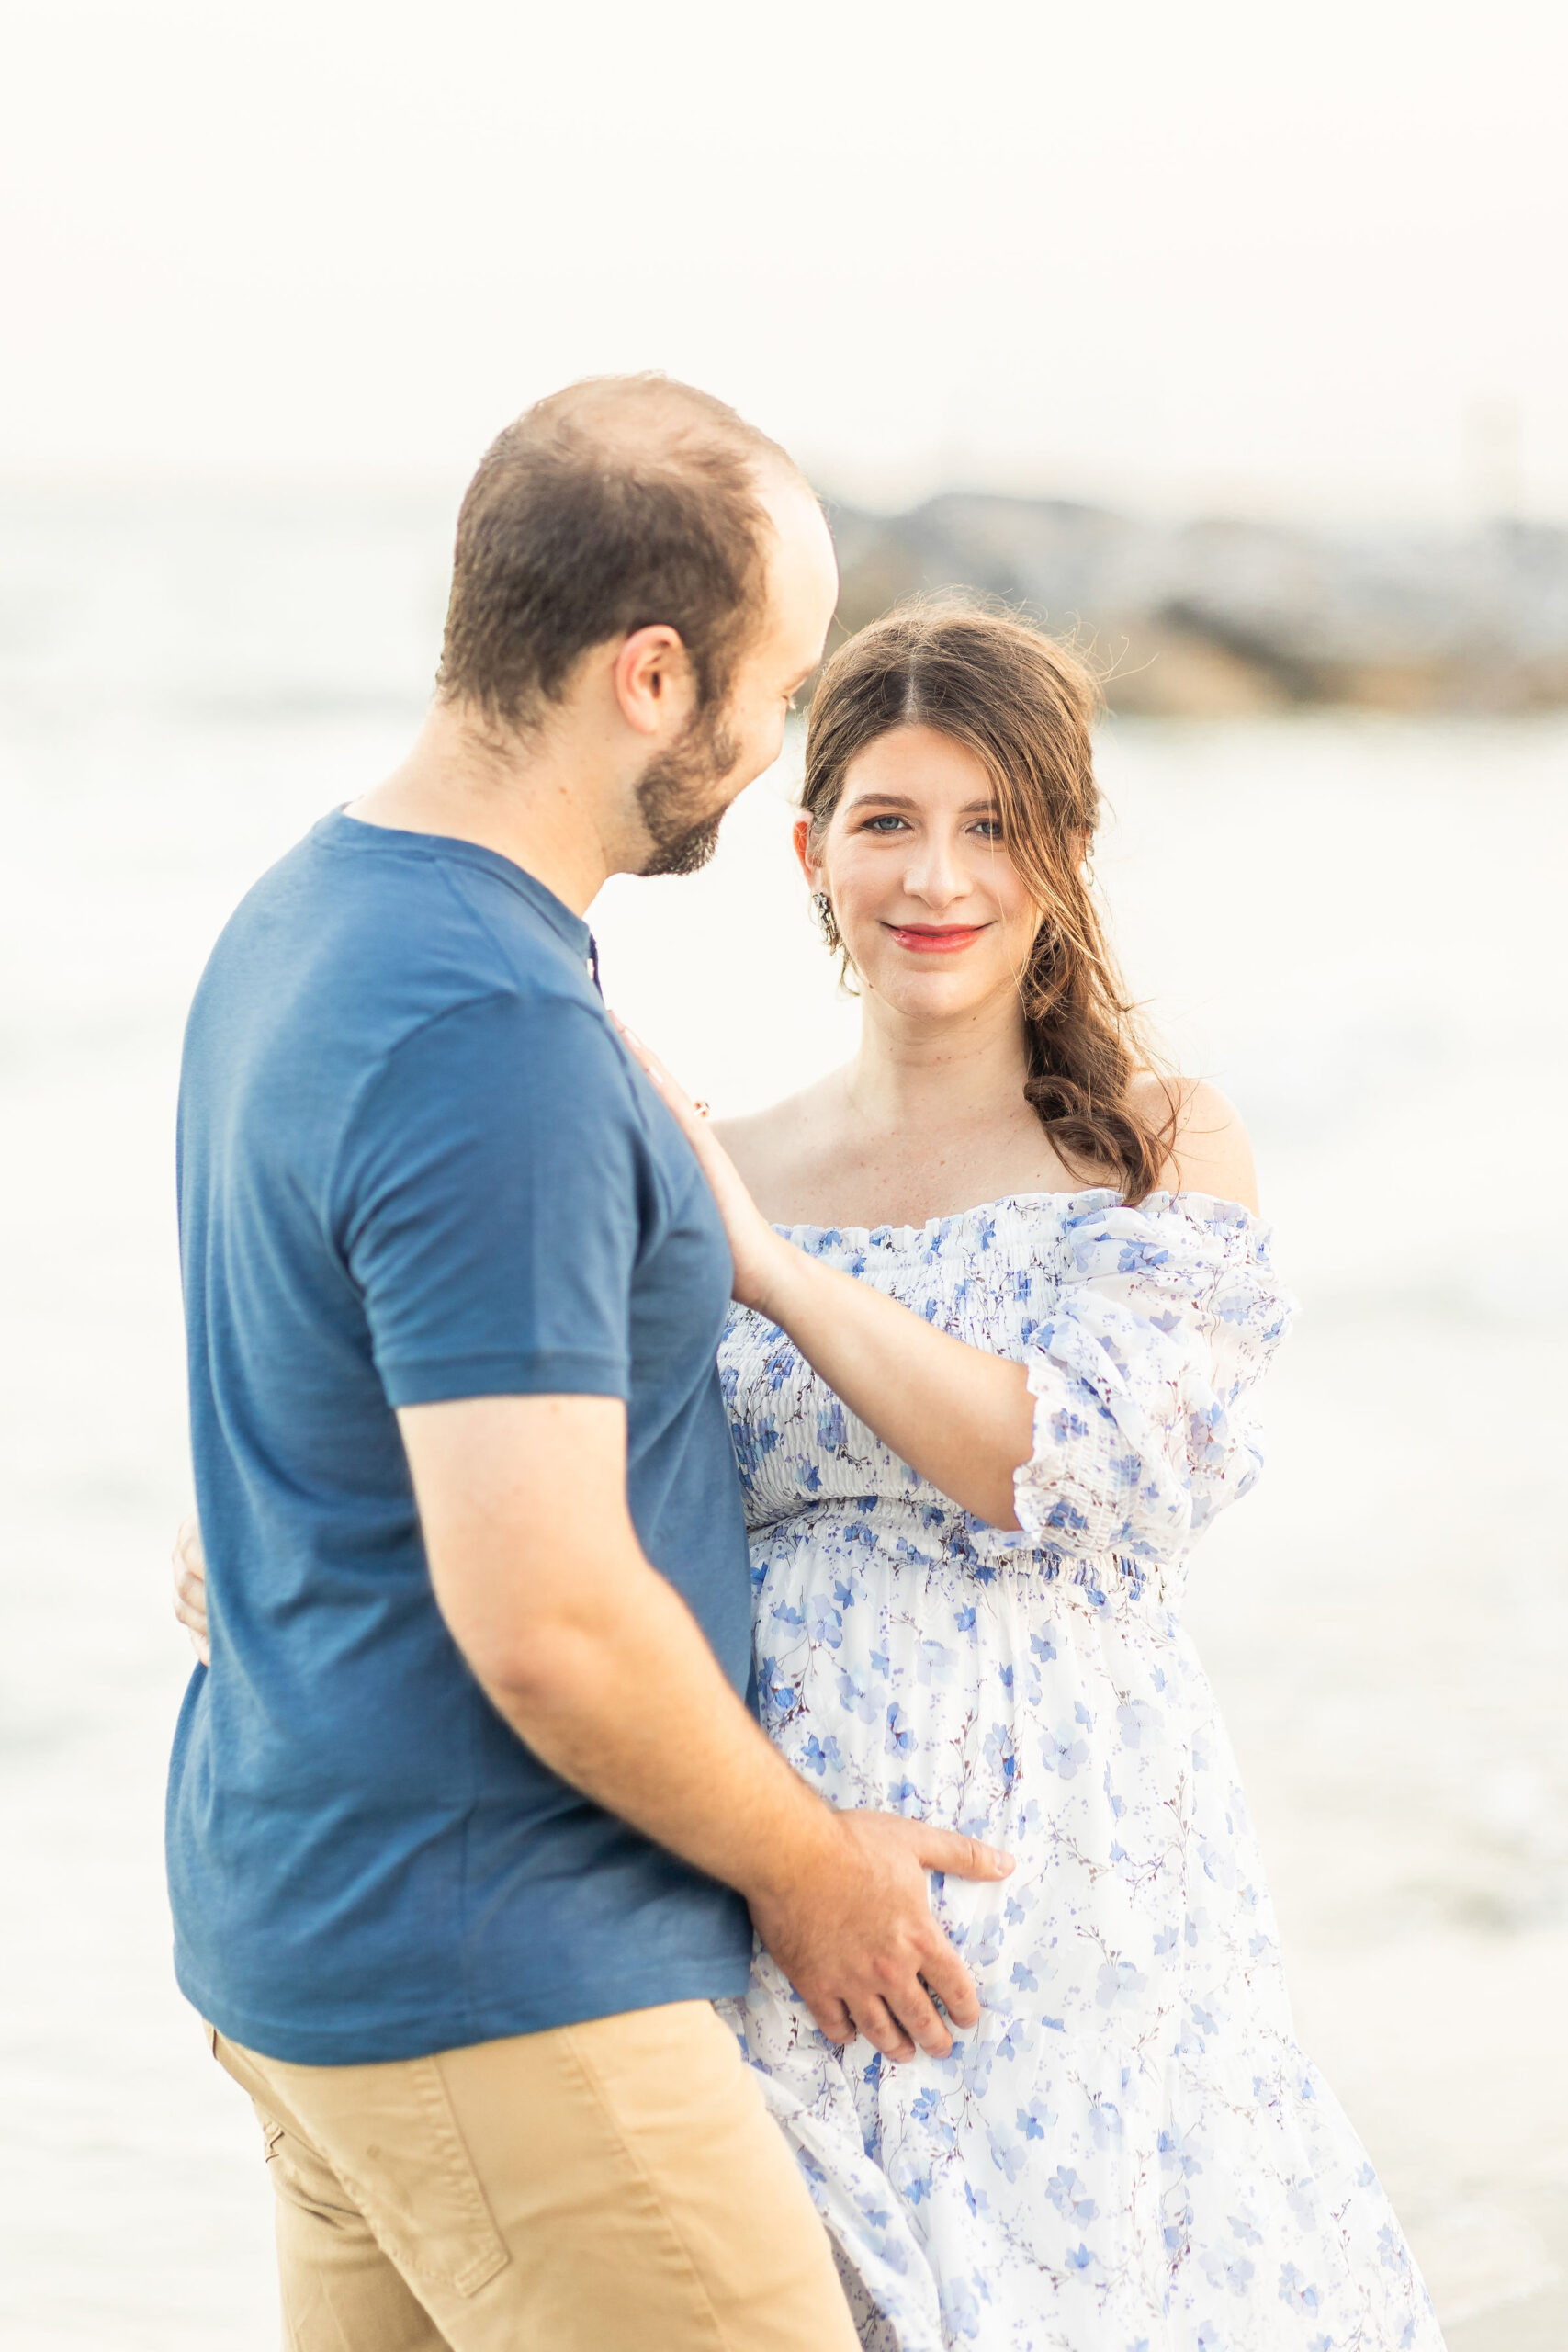 A mom to be leans onto her husband in a blue dress while standing on a beach at sunset before visiting coastal midwifery